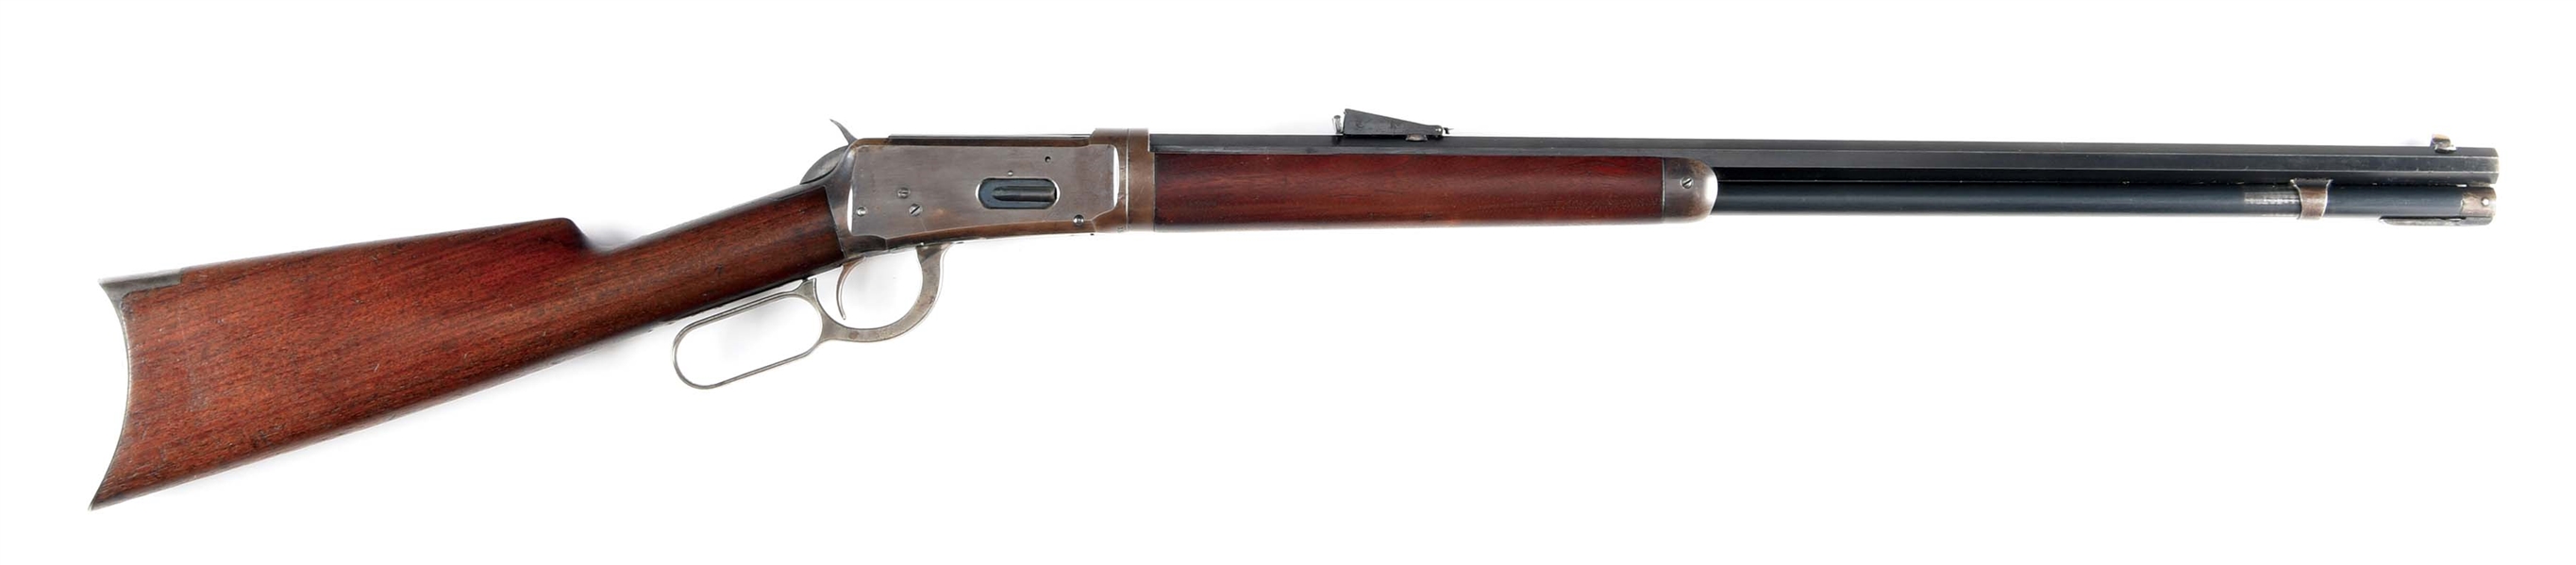 (C) WINCHESTER MODEL 1894 TAKEDOWN LEVER ACTION RIFLE (1906).